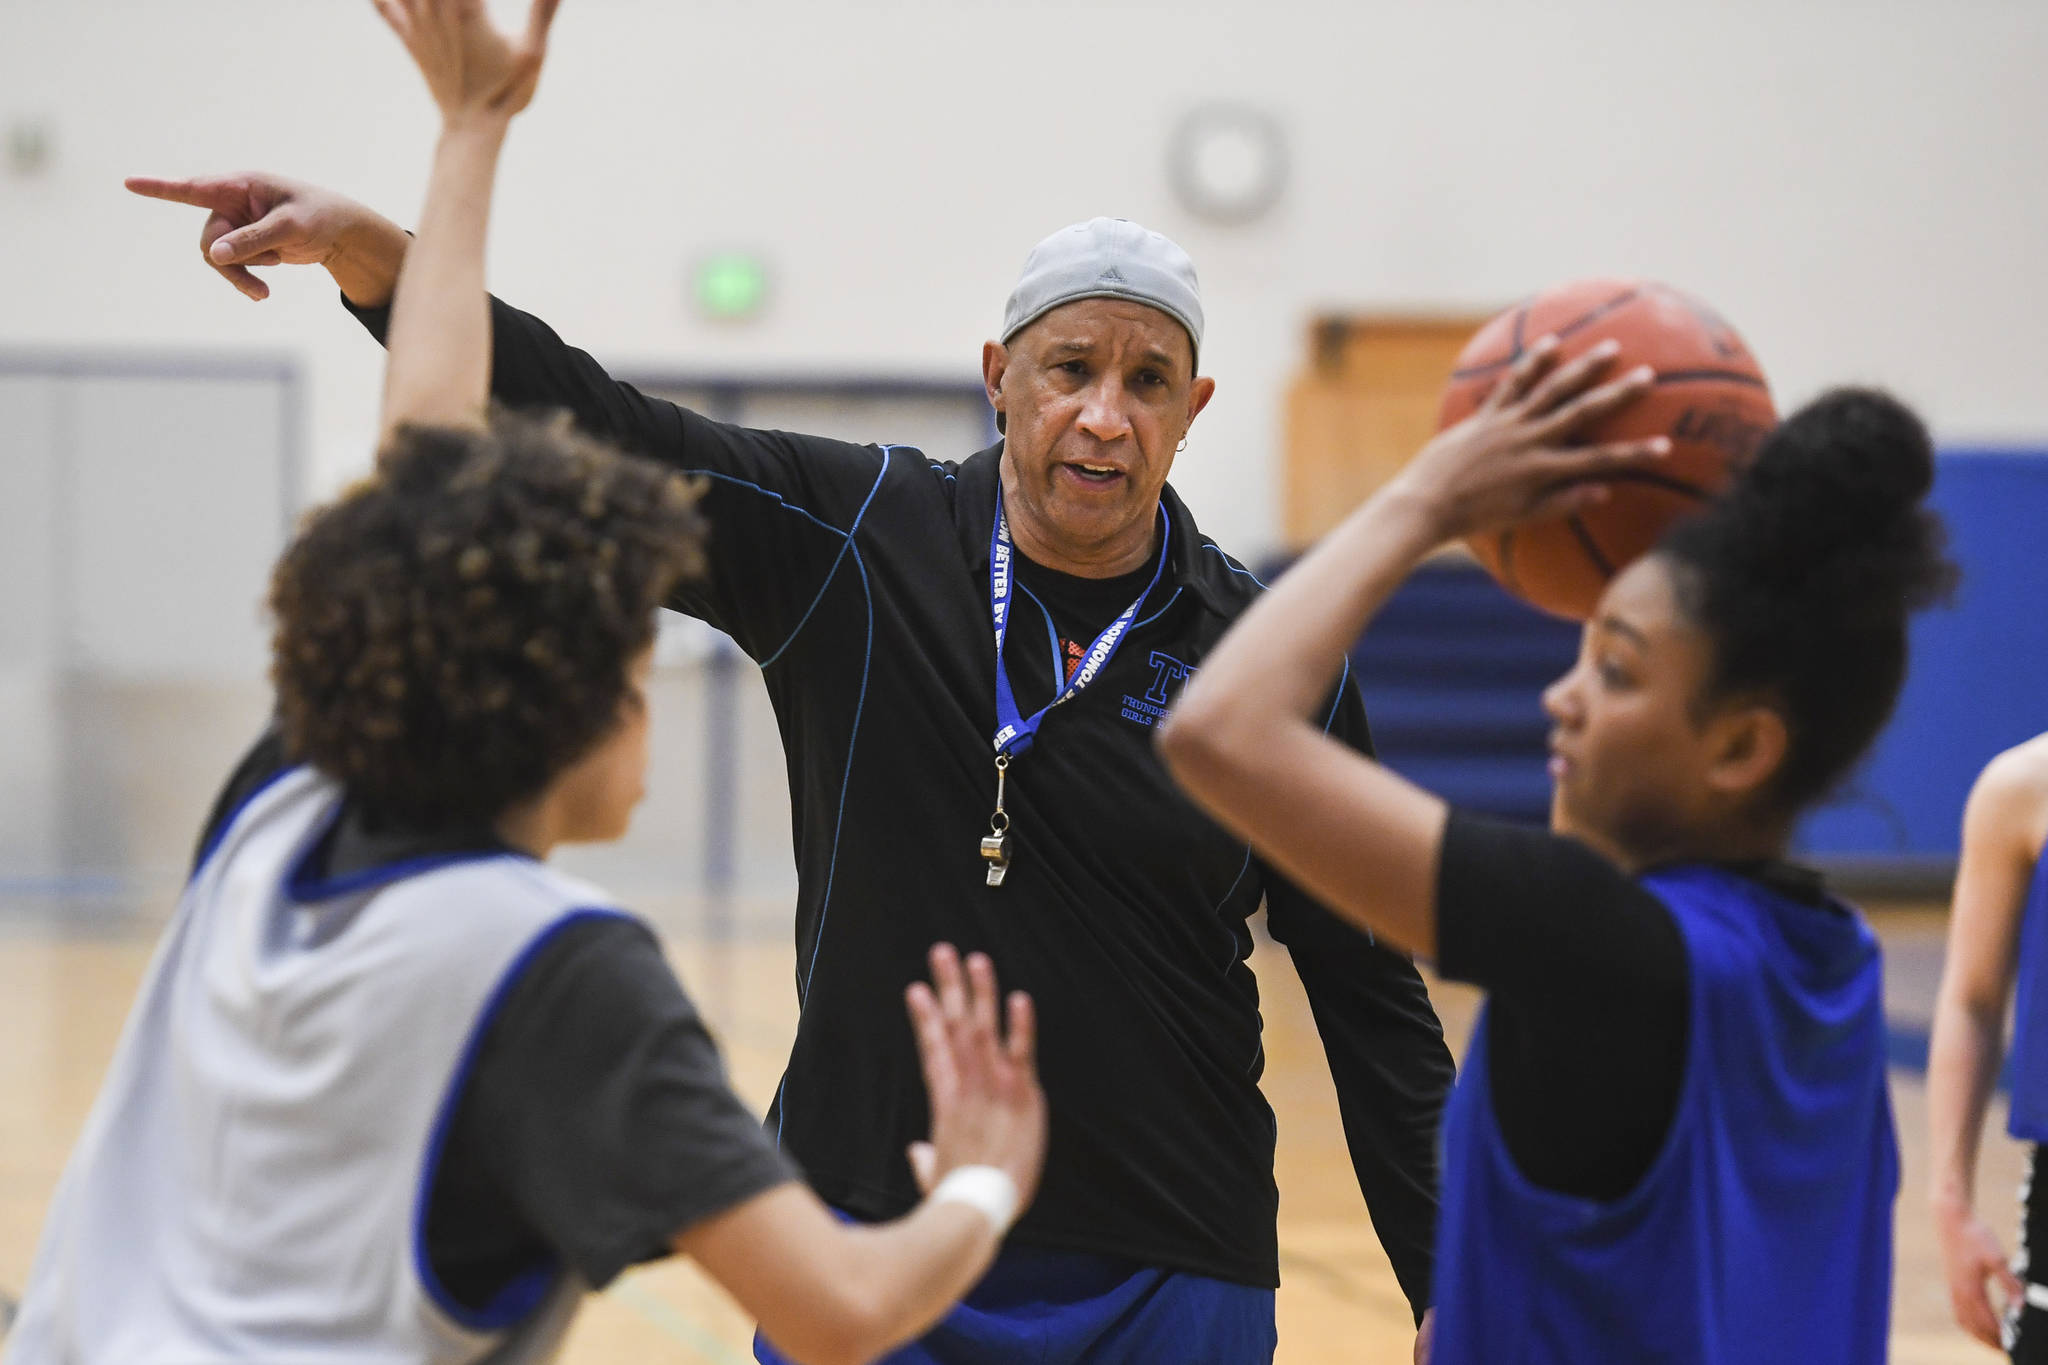 Coach Andy Lee gives encouragement during the girls varsity basketball practice at Thunder Mountain High School on Monday, Dec. 9, 2019. (Michael Penn | Juneau Empire)